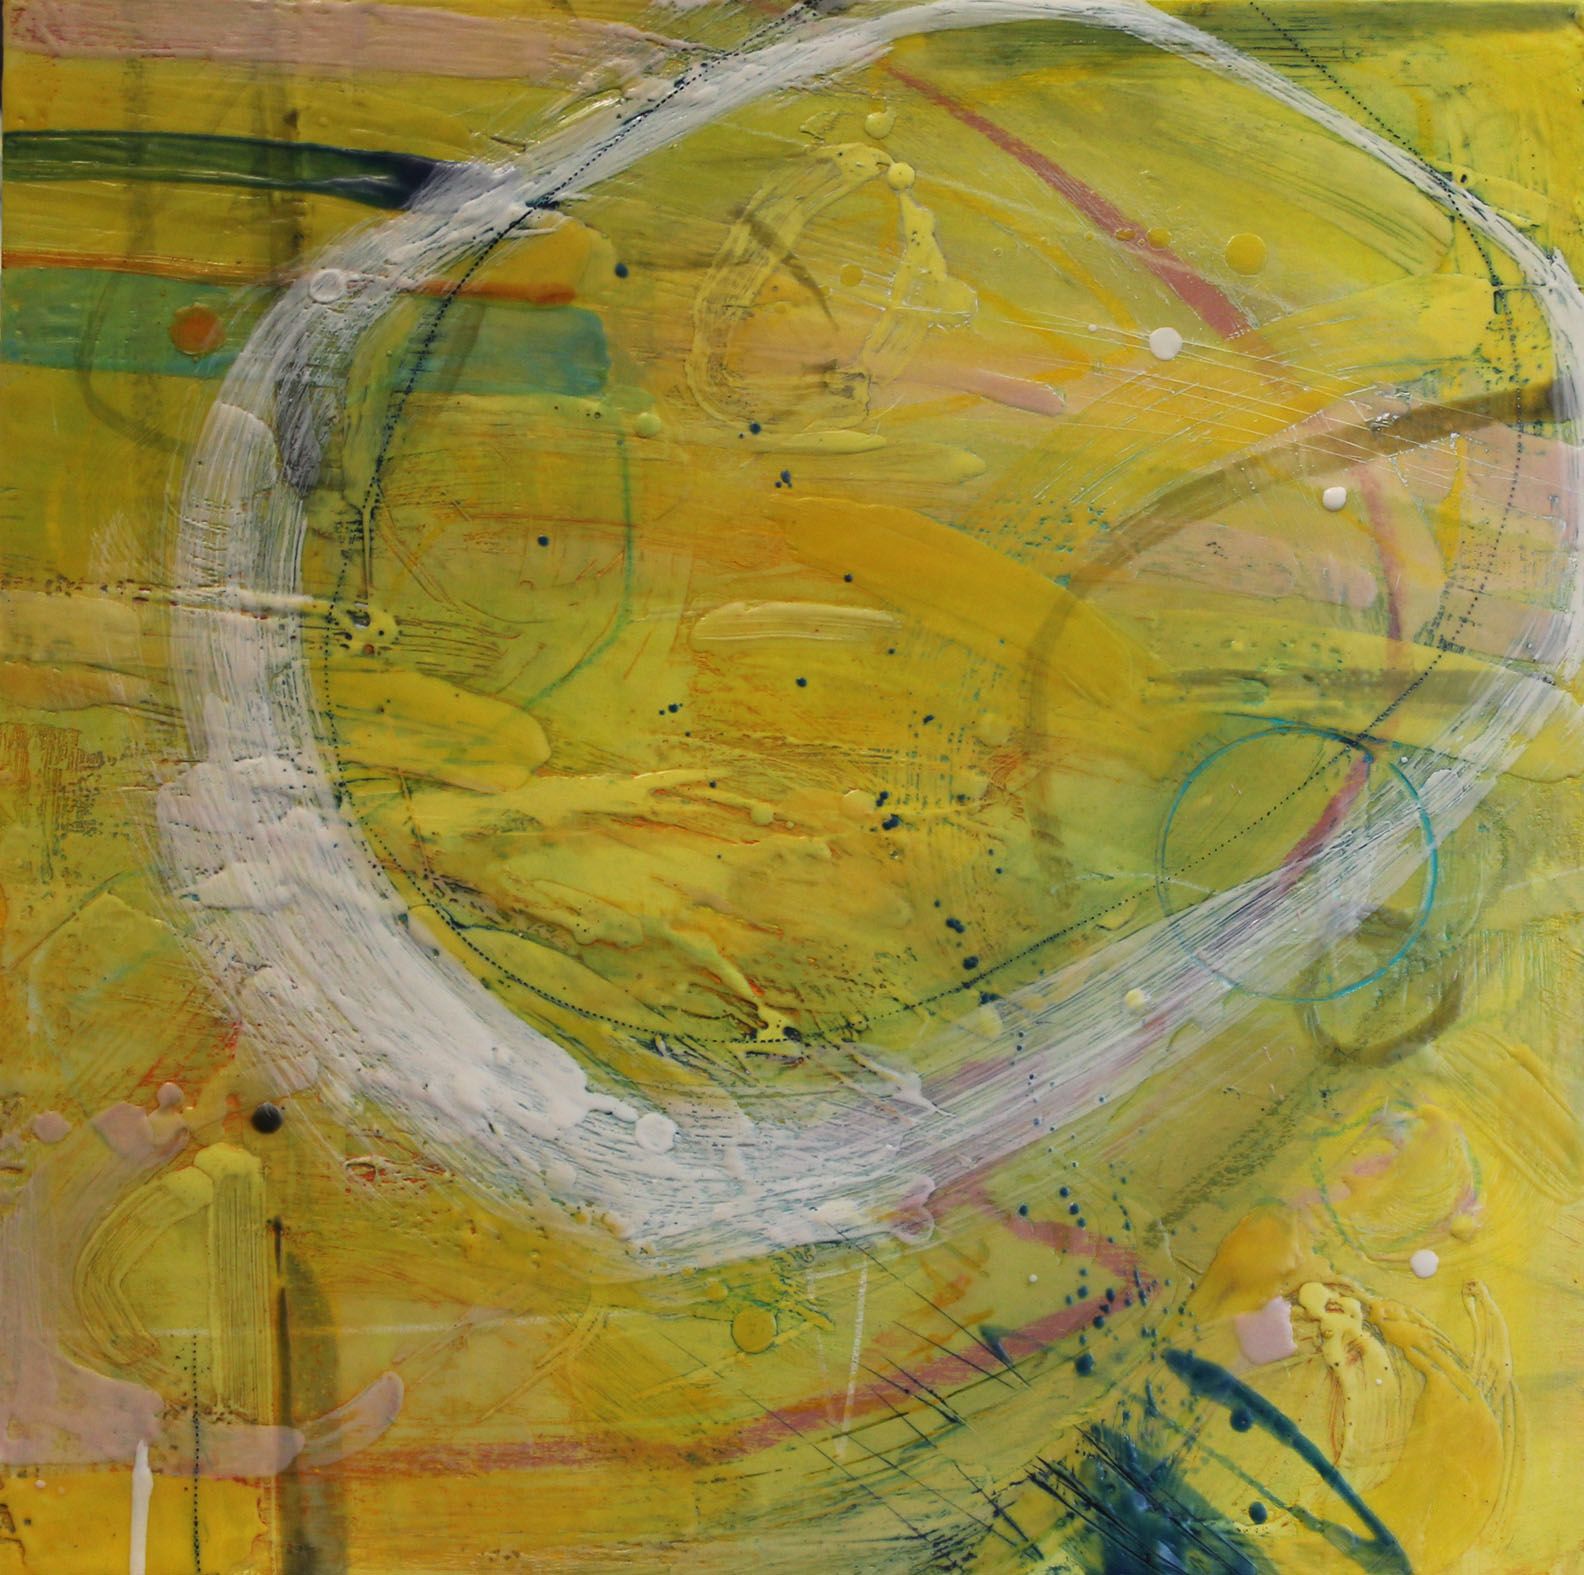 Abstract in yellowmwith white oval